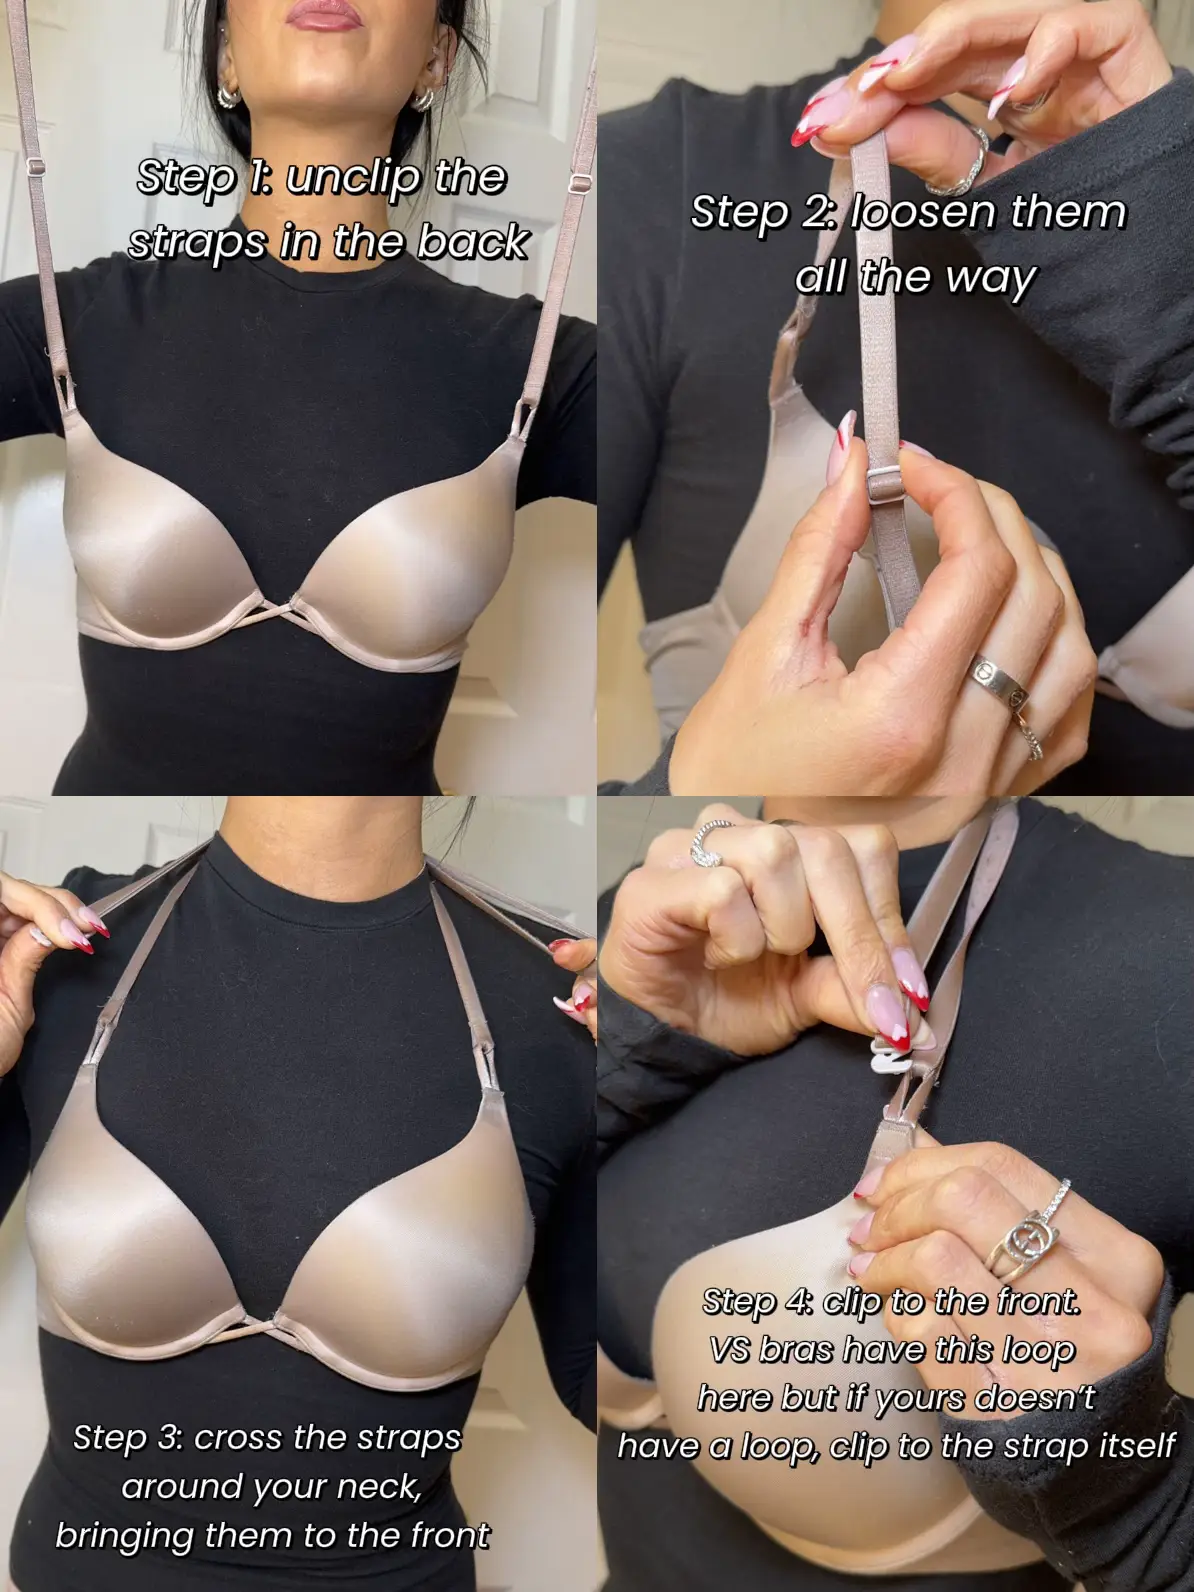 HACK: how to hide your bra in halter tops + tanks, Gallery posted by  Lexirosenstein